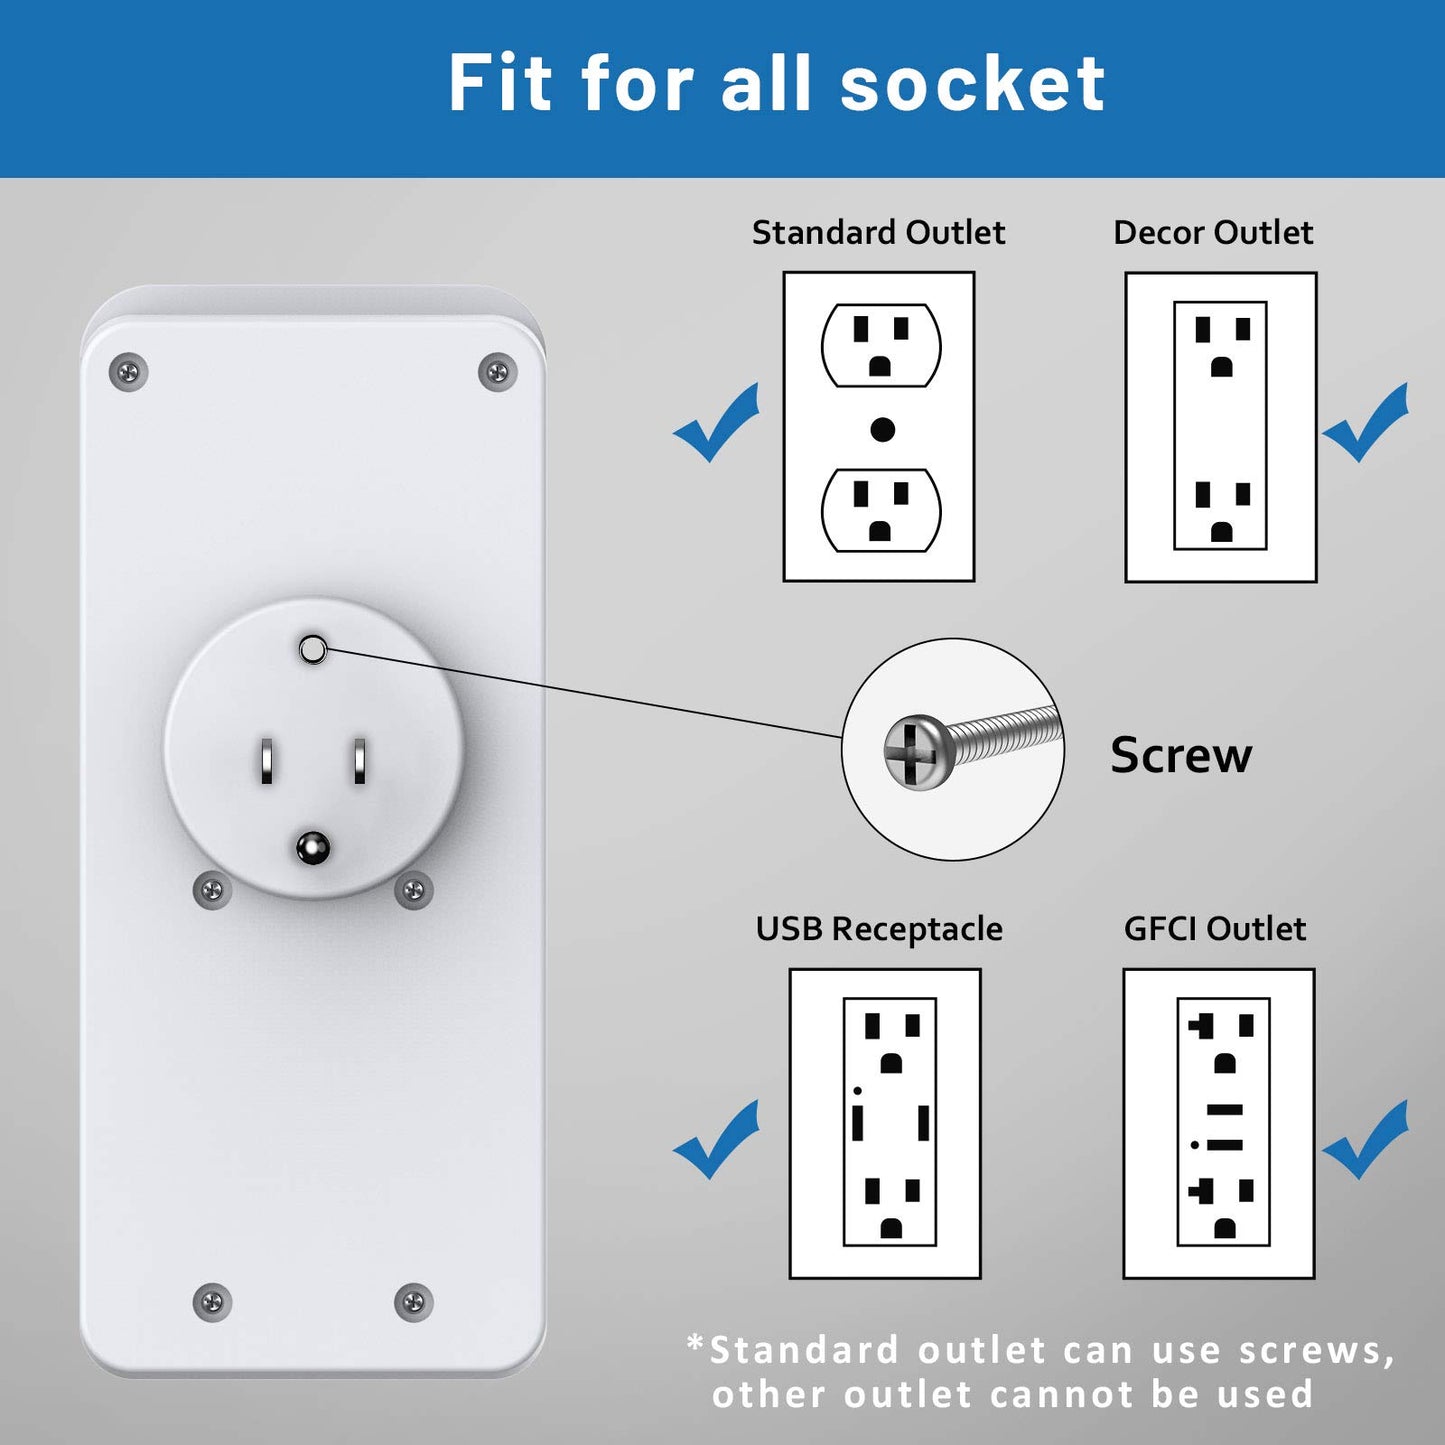 Surge Protector Outlet Extender, USB Wall Charger, SOKETPUG Multi Plug Outlet with 2 USB Charging Ports(Smart 2.4A Total), 9 AC Outlet Splitter Mountable, 3 Sided Plug Extender, Dorm Room Essentials